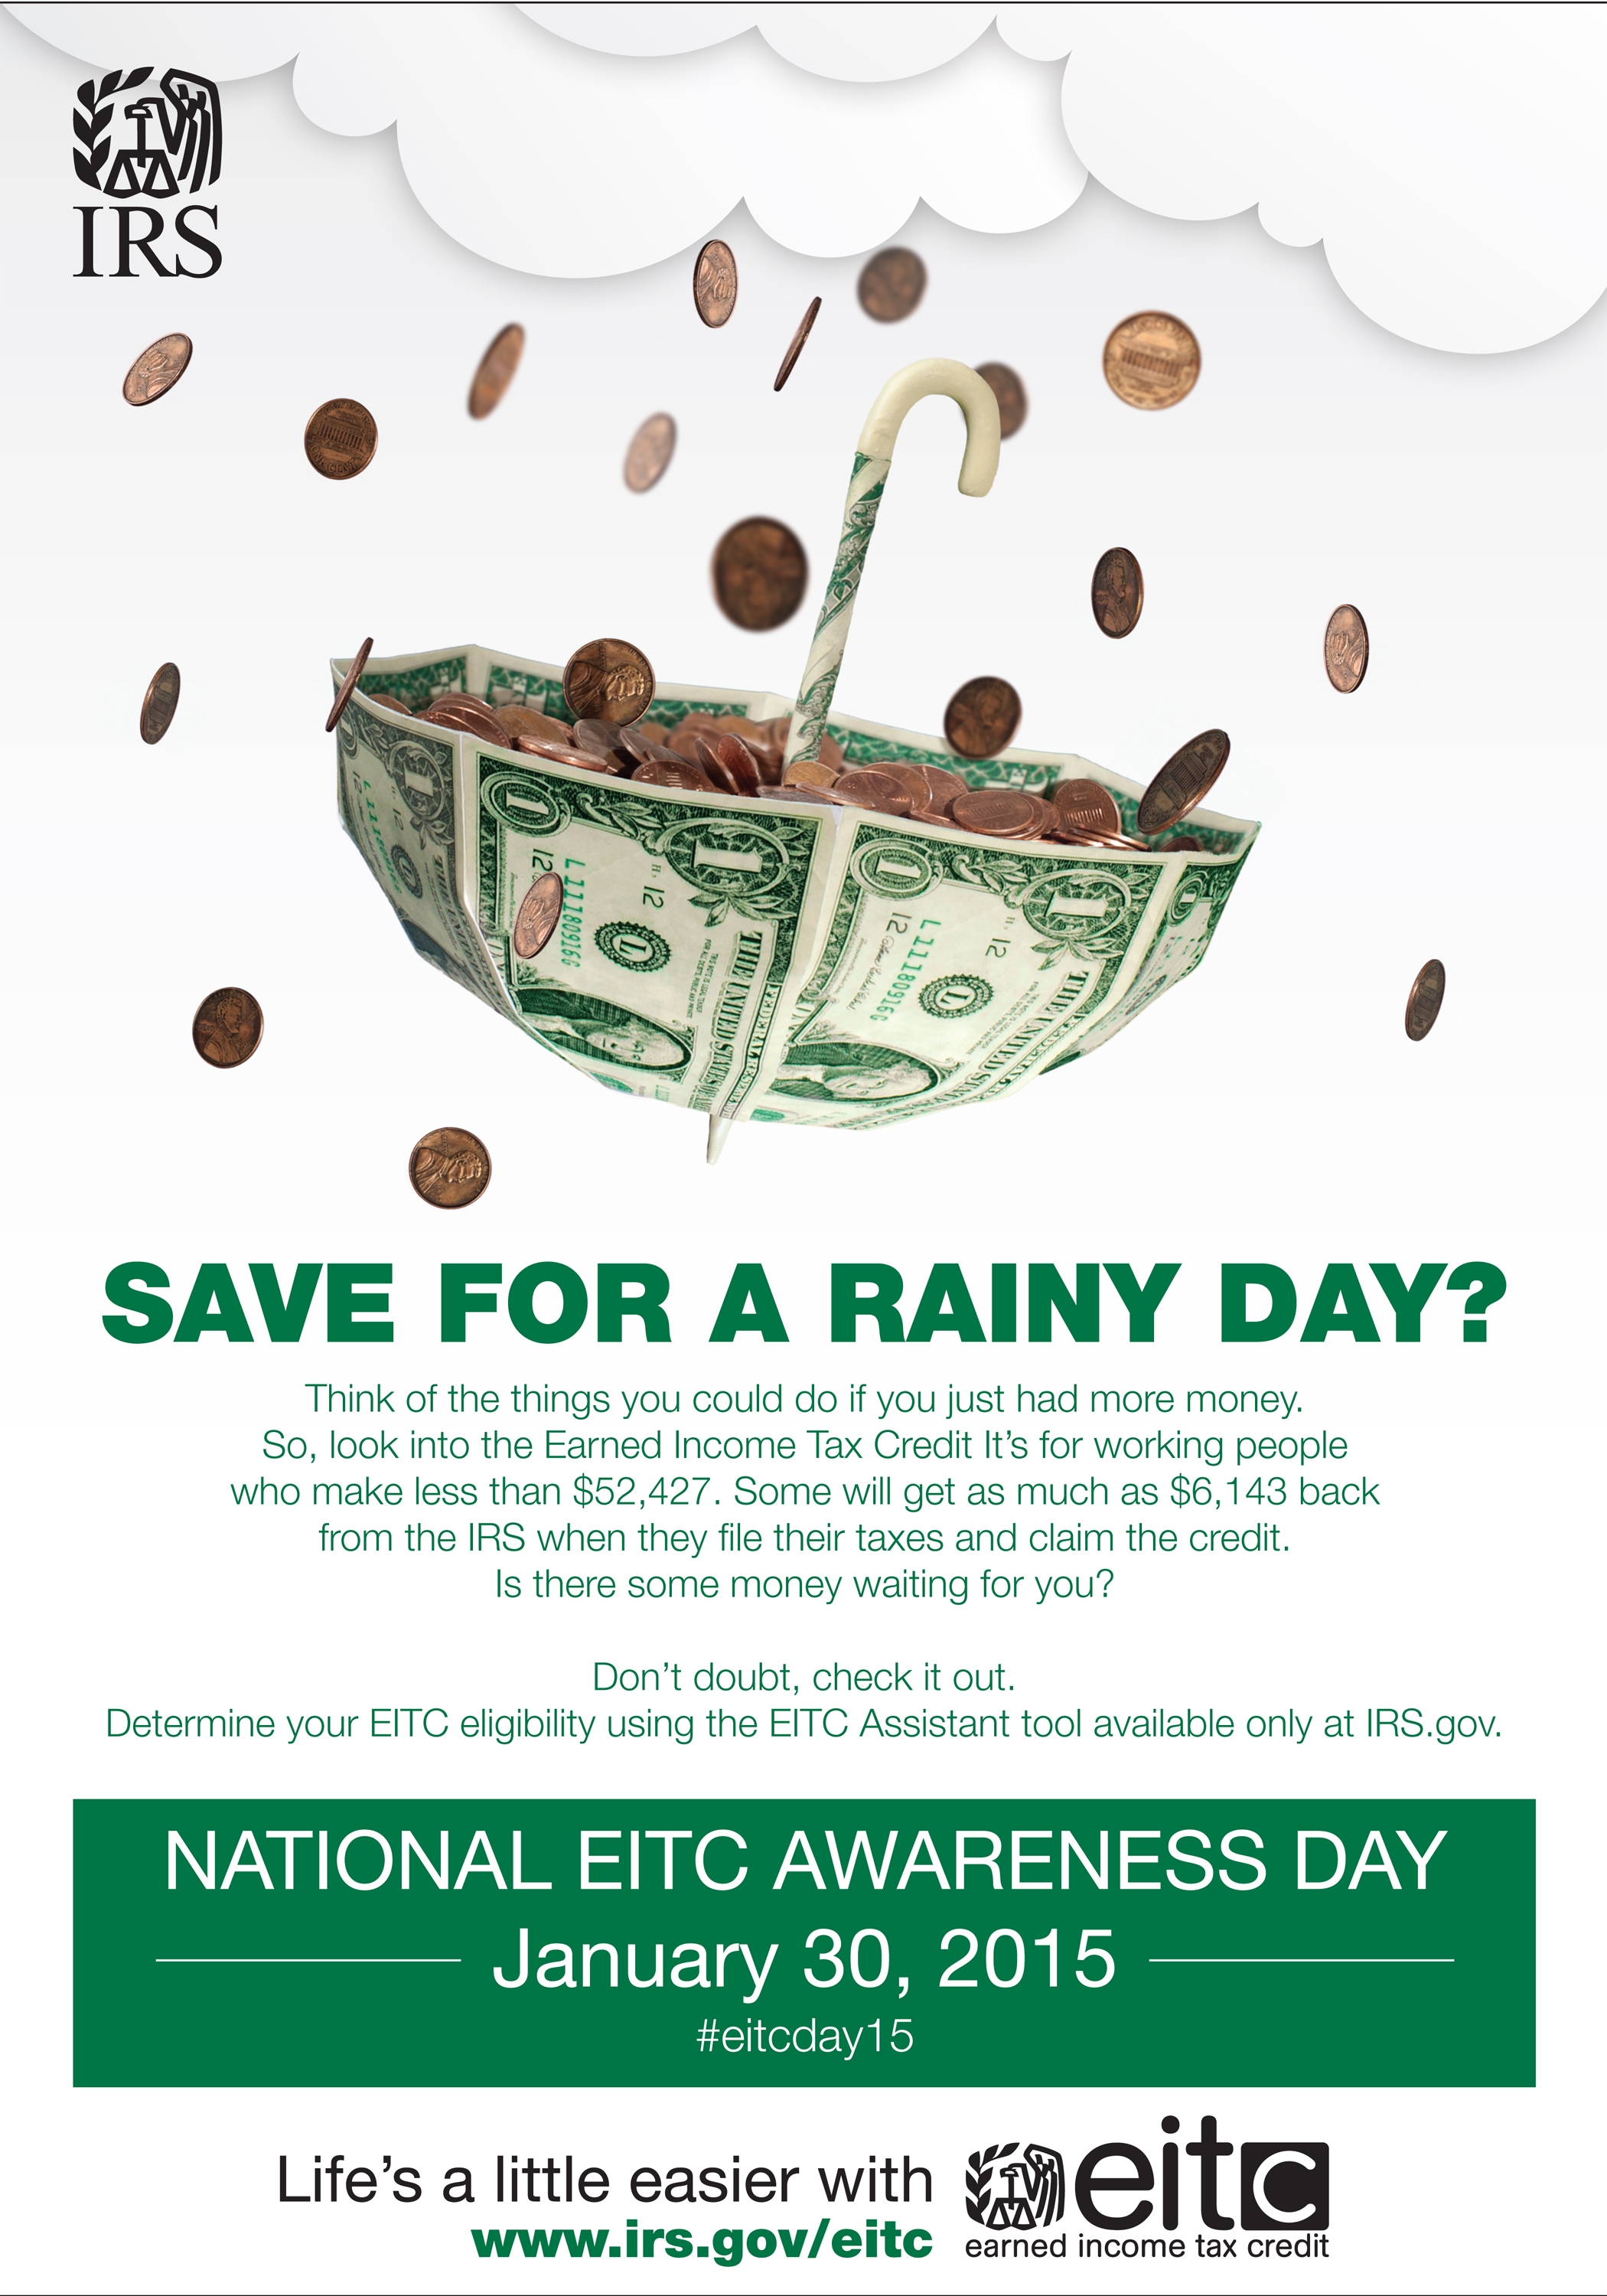 Eitc Awareness Day Claiming Your Tax Credit Is Now Even Easier With